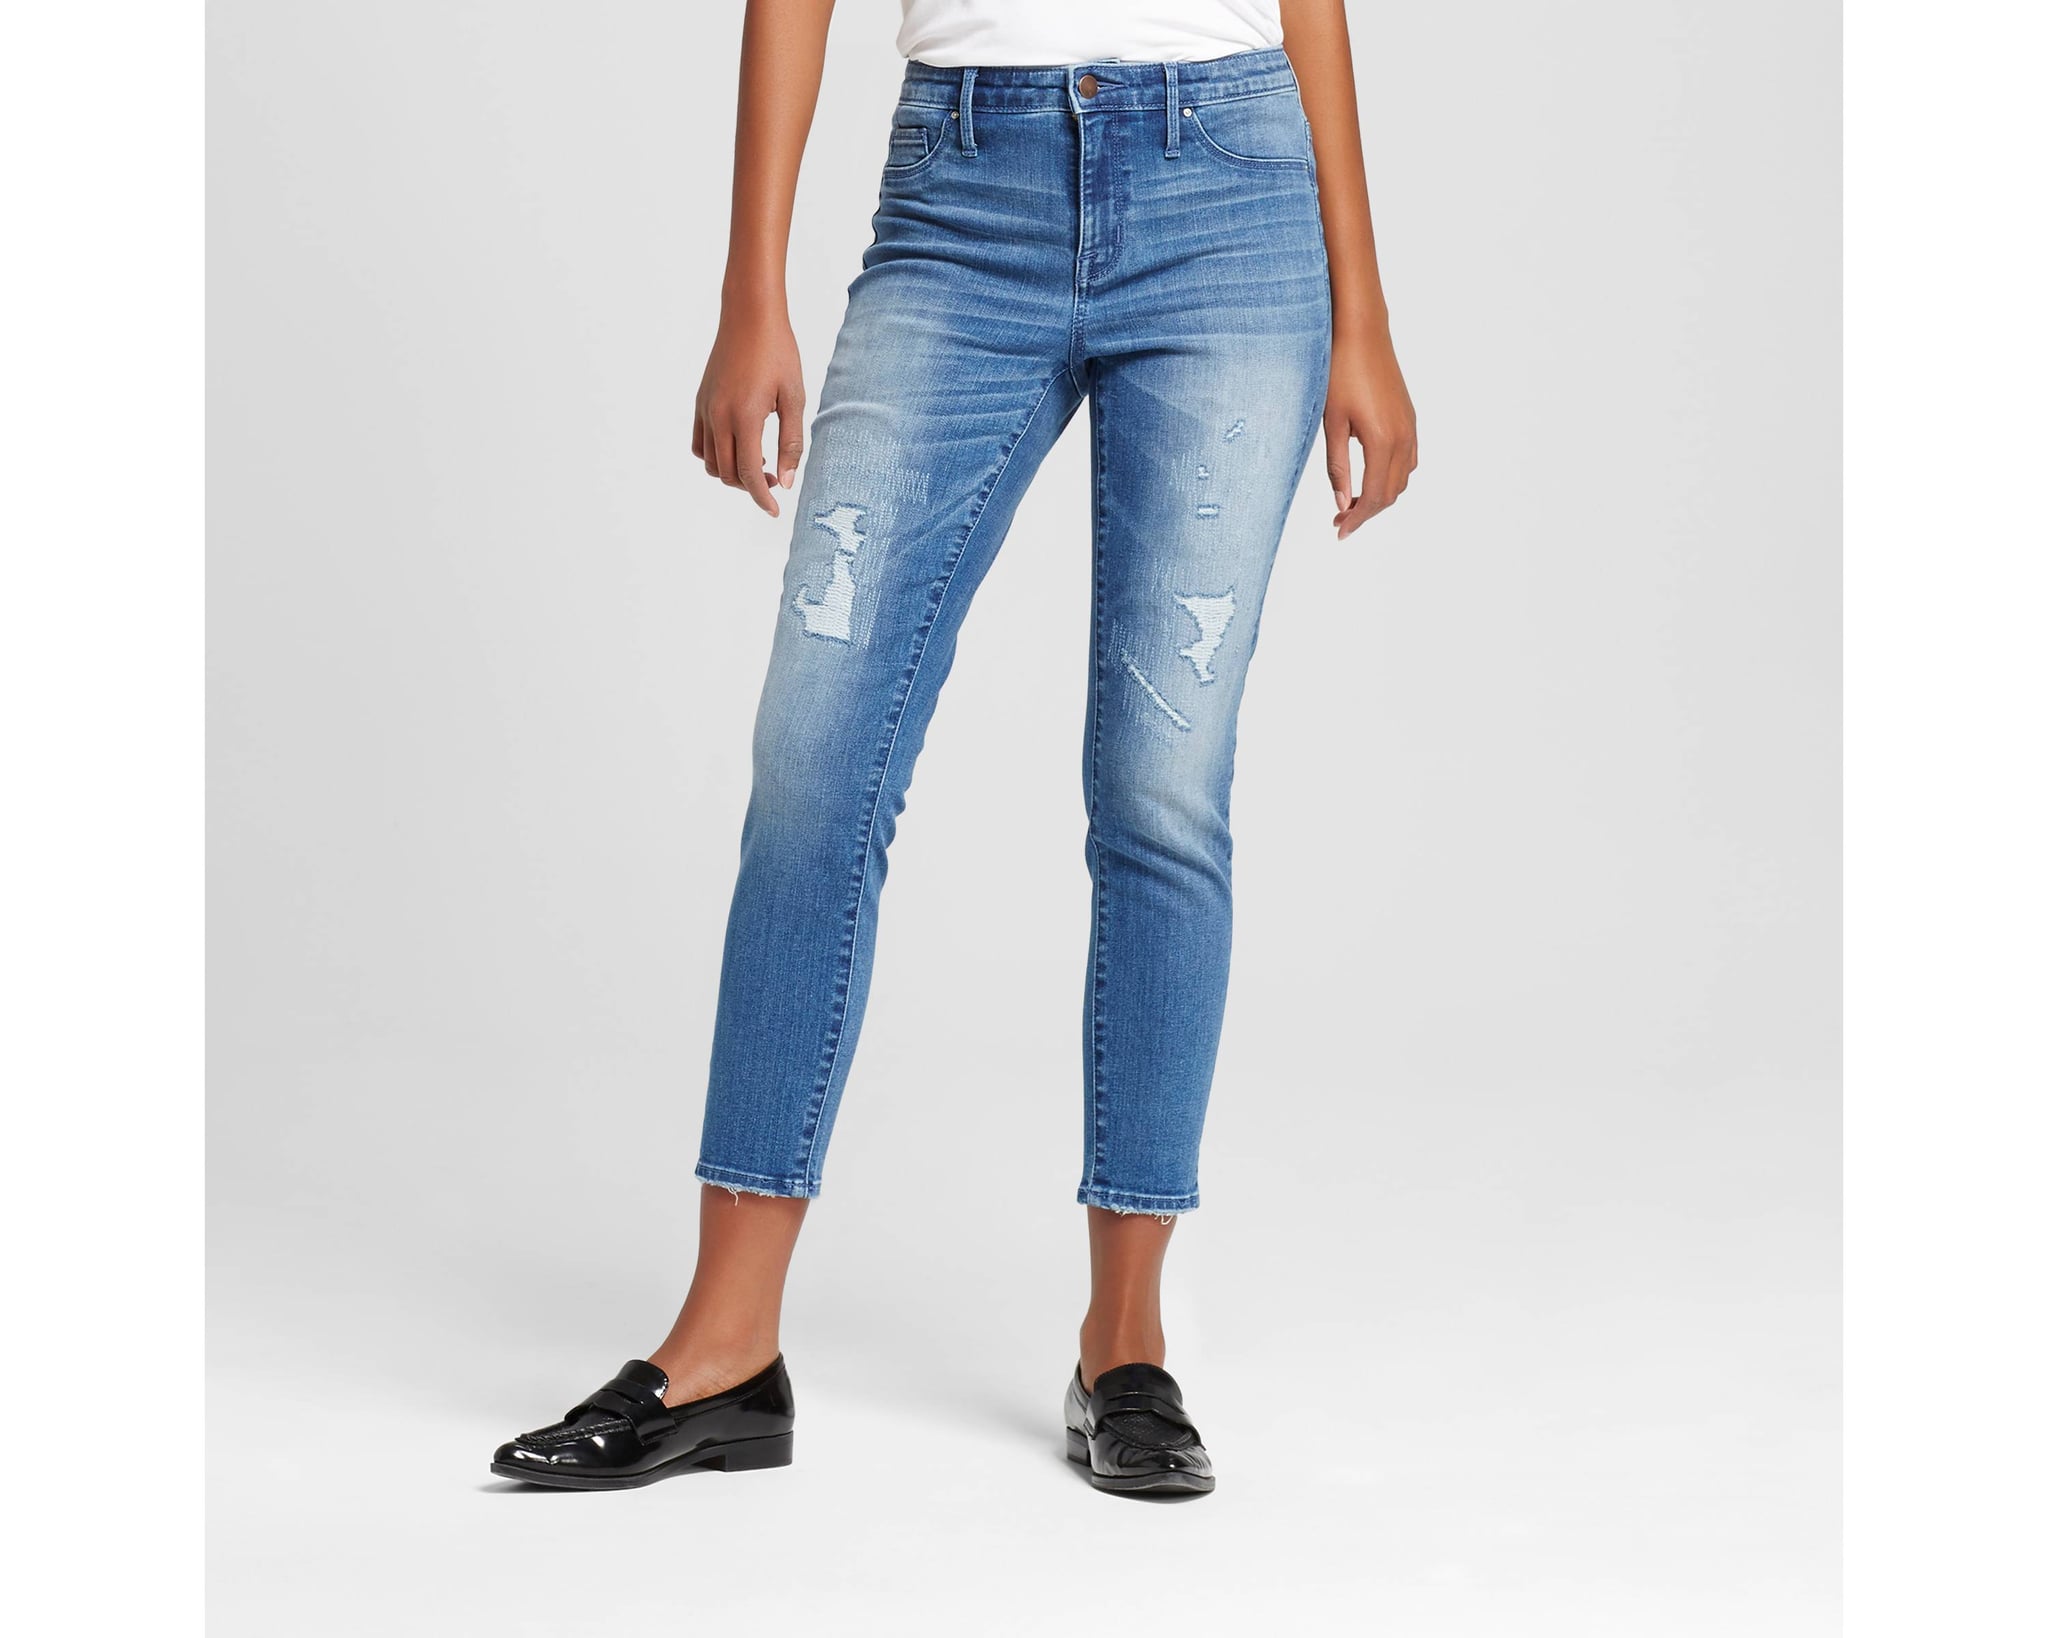 mossimo jeggings high rise